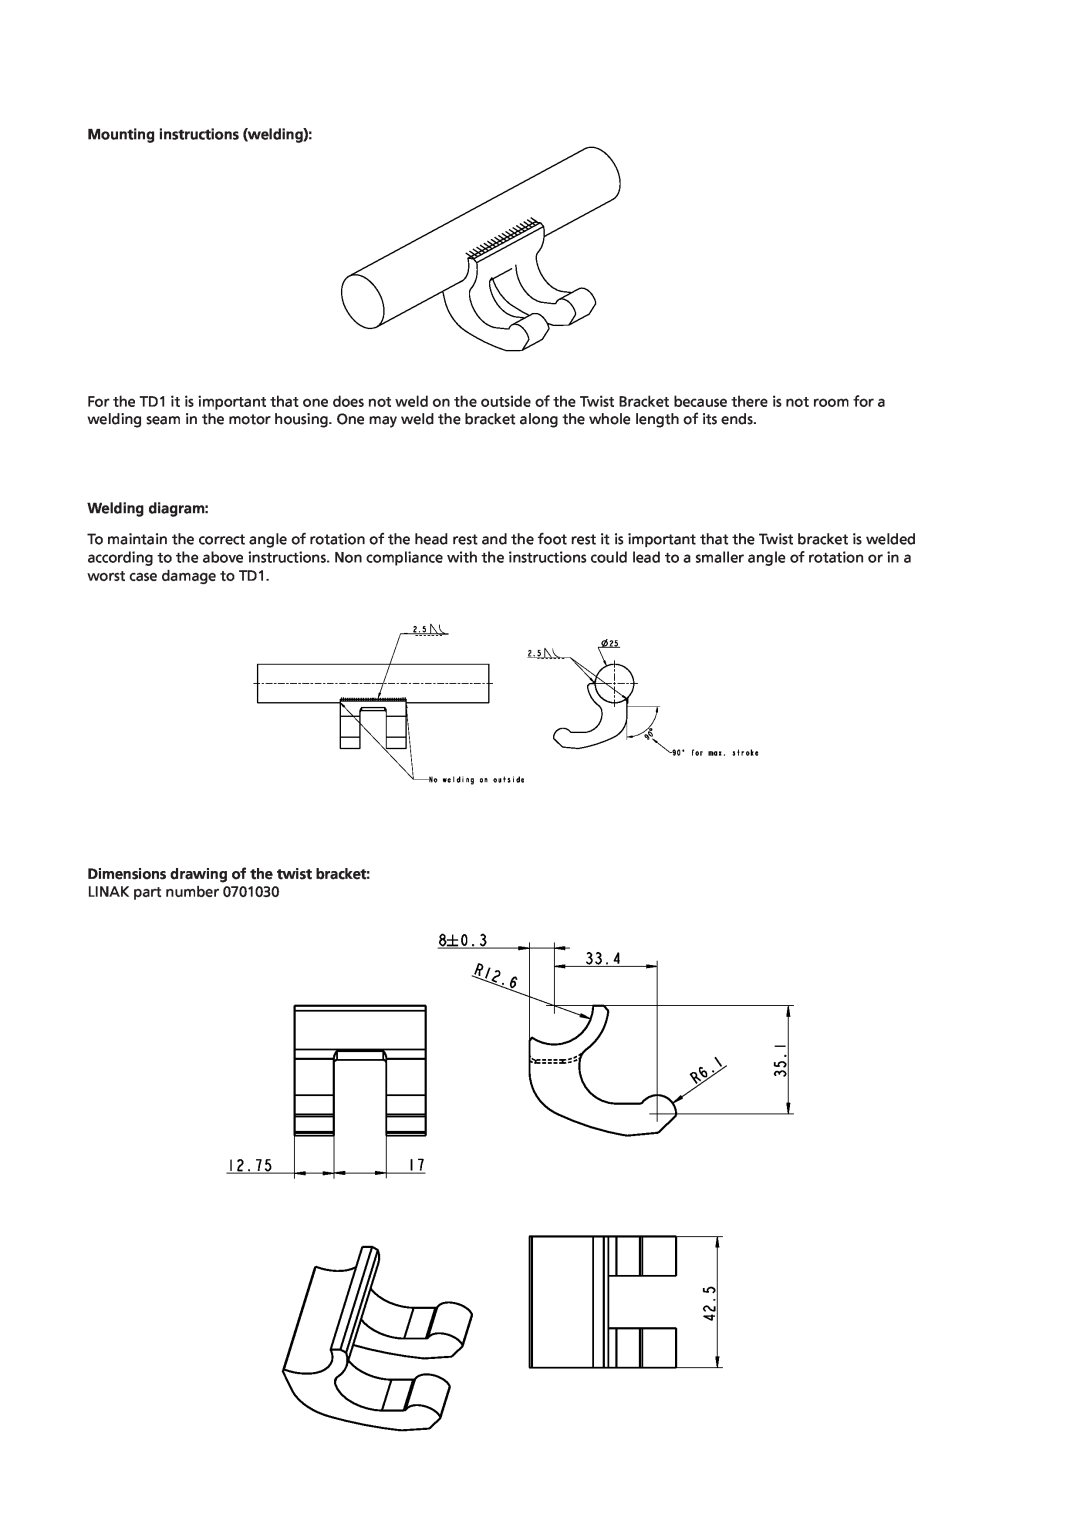 Linak TD1 manual Mounting instructions welding, Welding diagram, Dimensions drawing of the twist bracket 